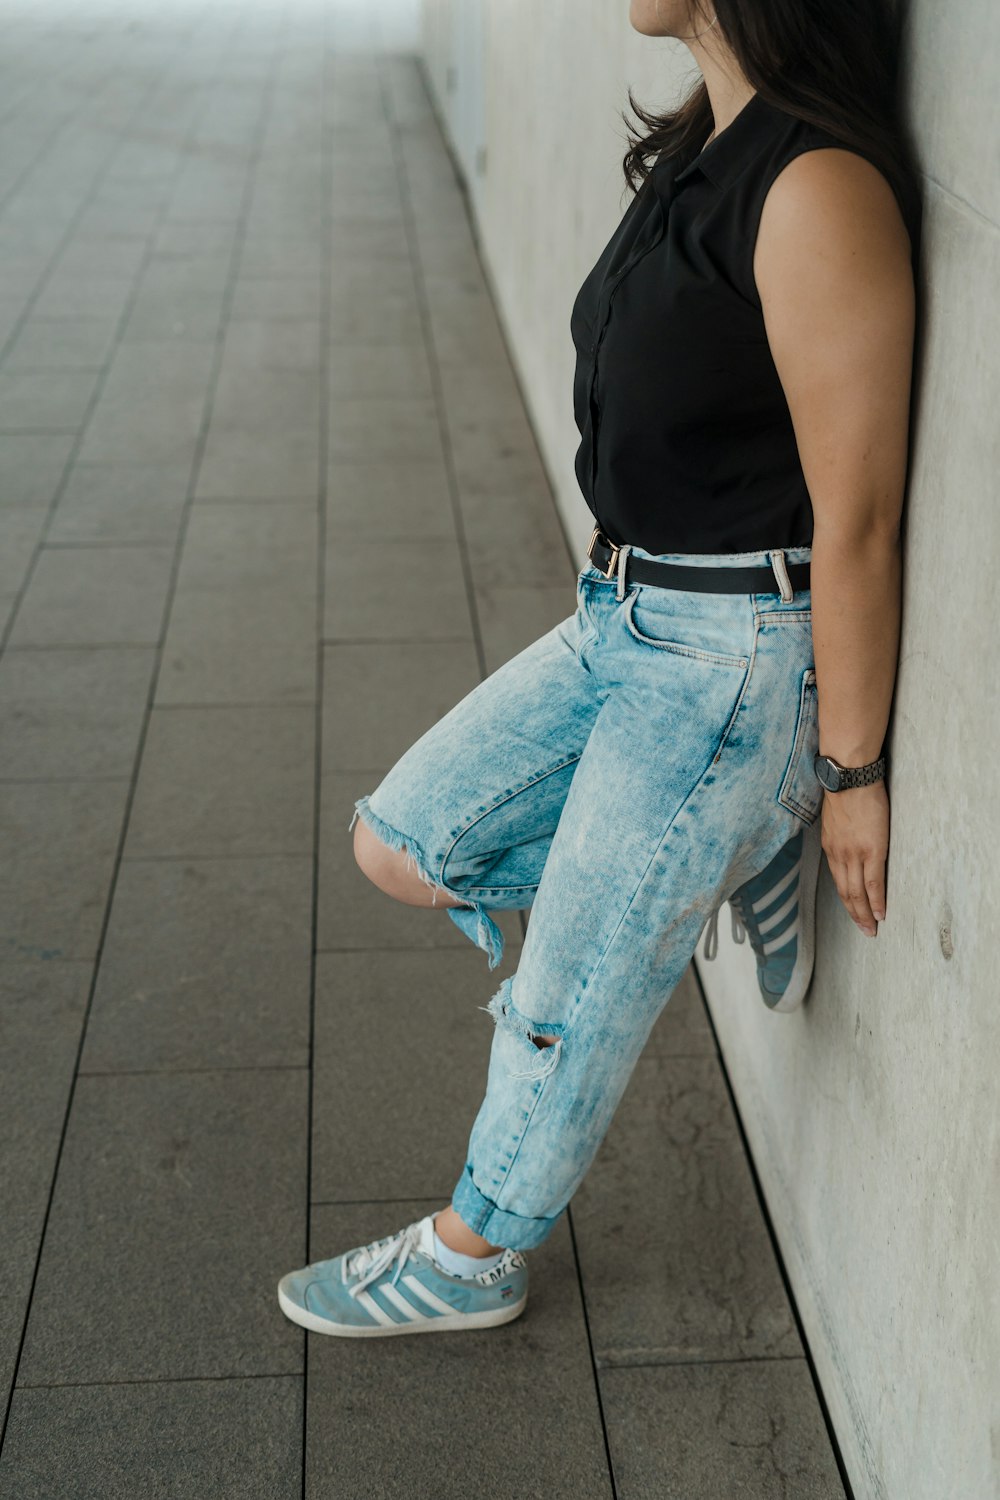 woman in blue denim jeans and black tank top